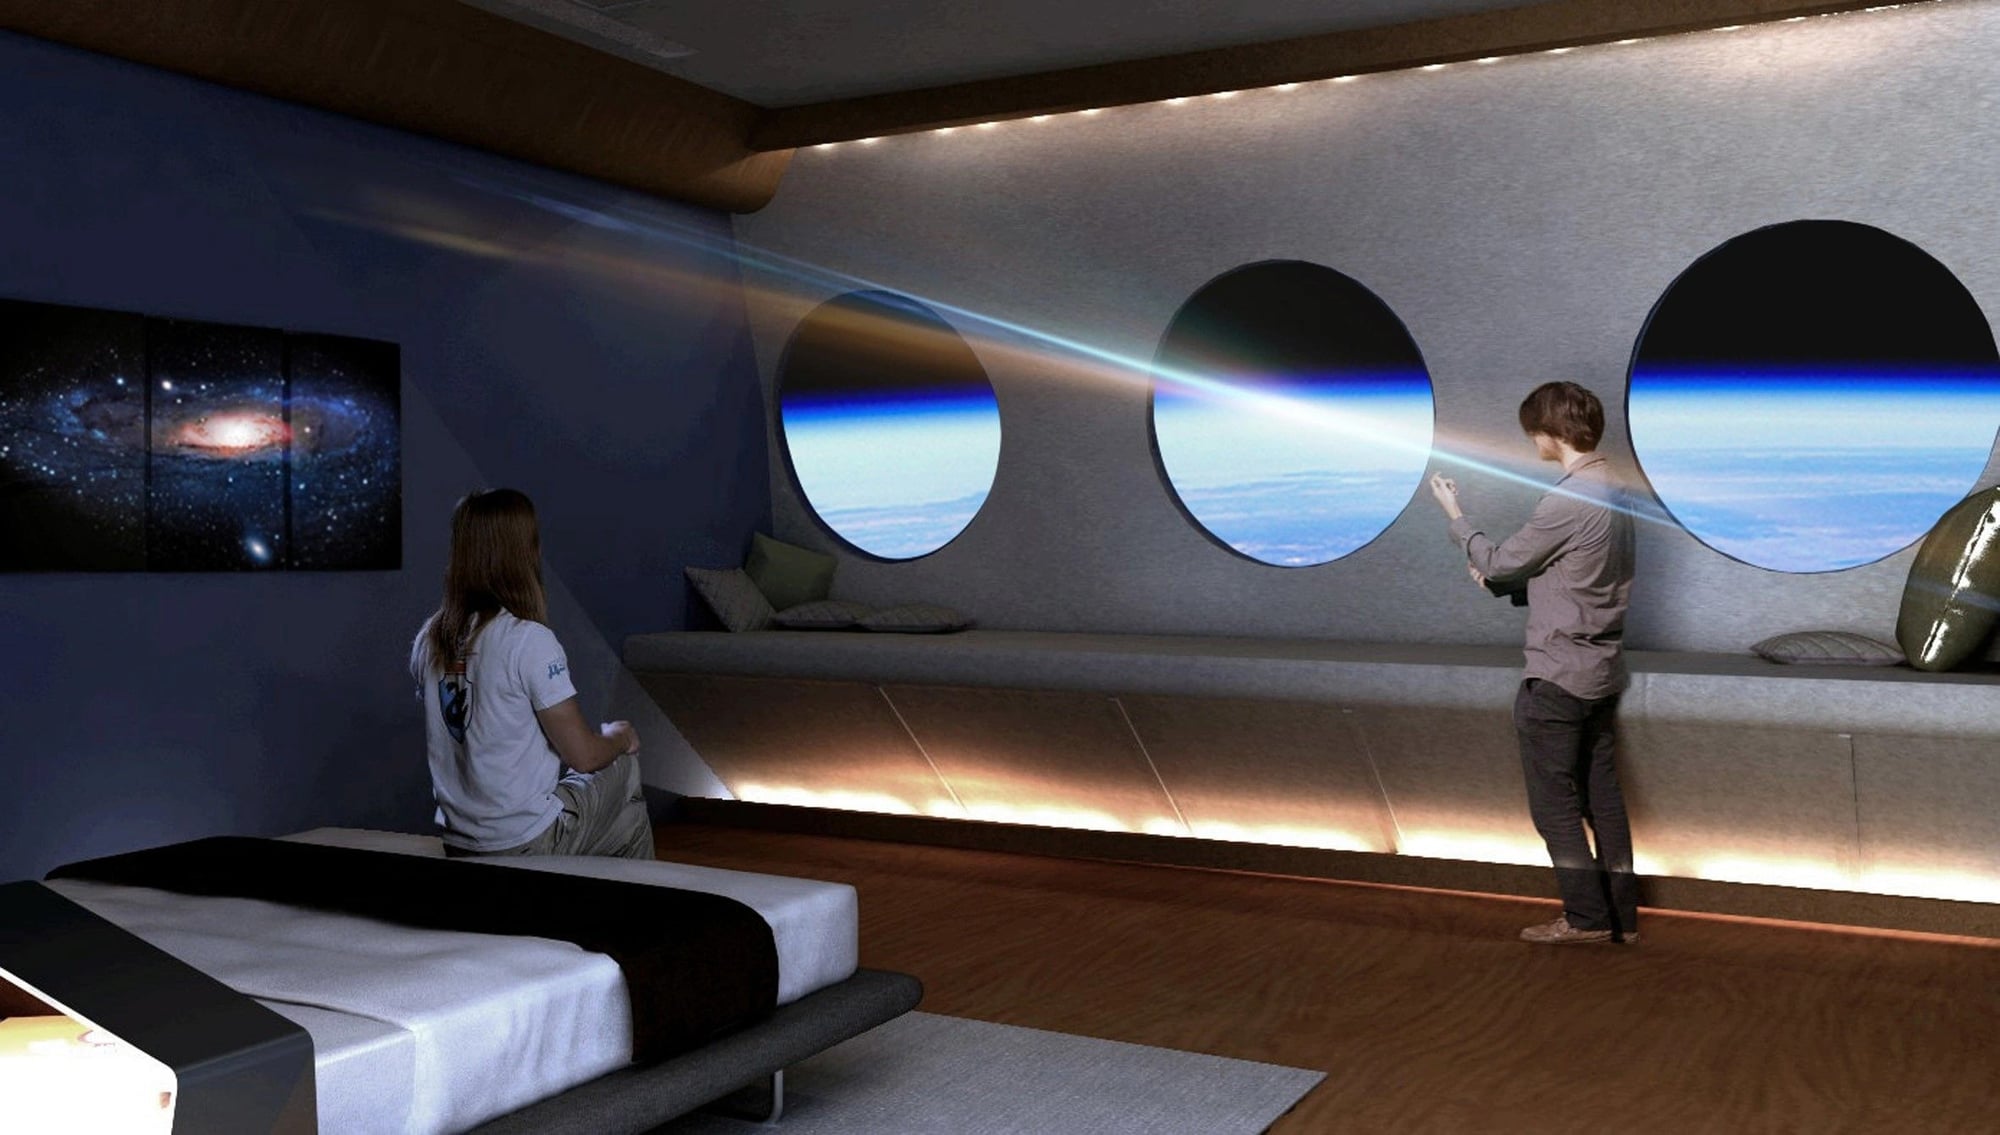 Luxurious bedroom in the Voyager station space hotel overlooking planet Earth.